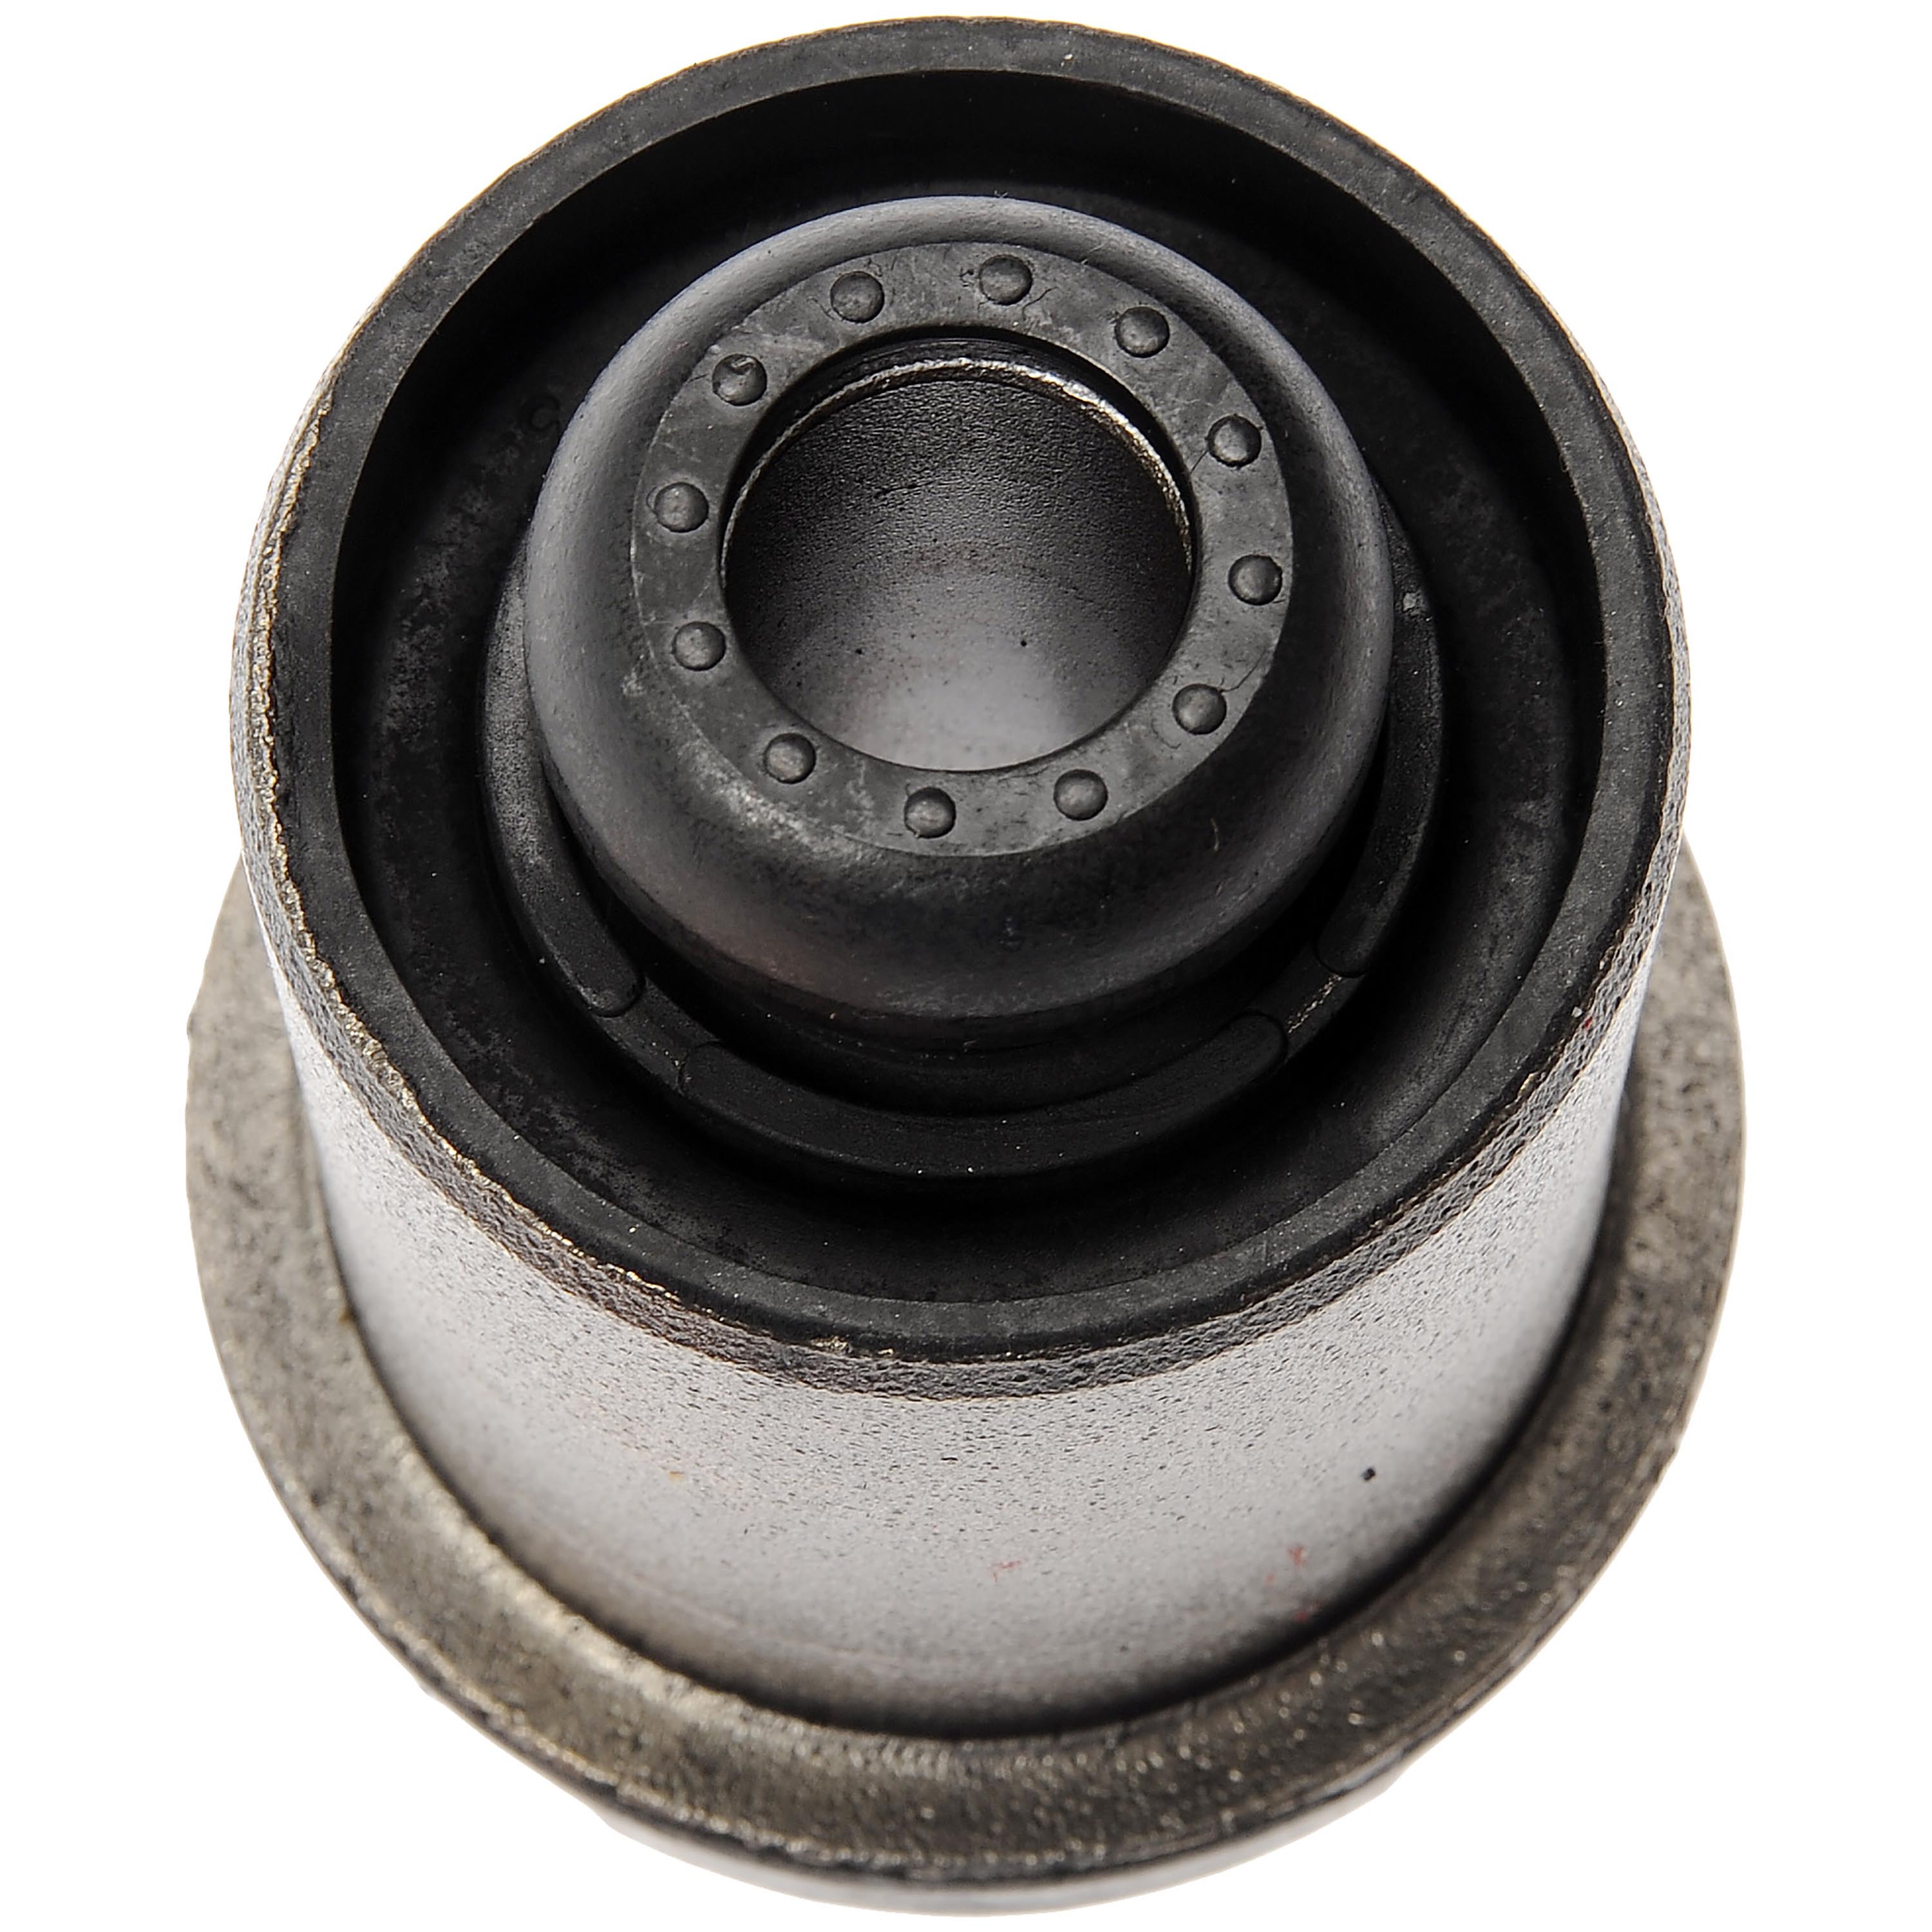 Dorman BC86340PR Suspension Control Arm Bushing for Specific Ford / Lincoln Models Fits select: 2009-2016 FORD F150, 2019 FORD F150 SUPERCREW - image 3 of 4